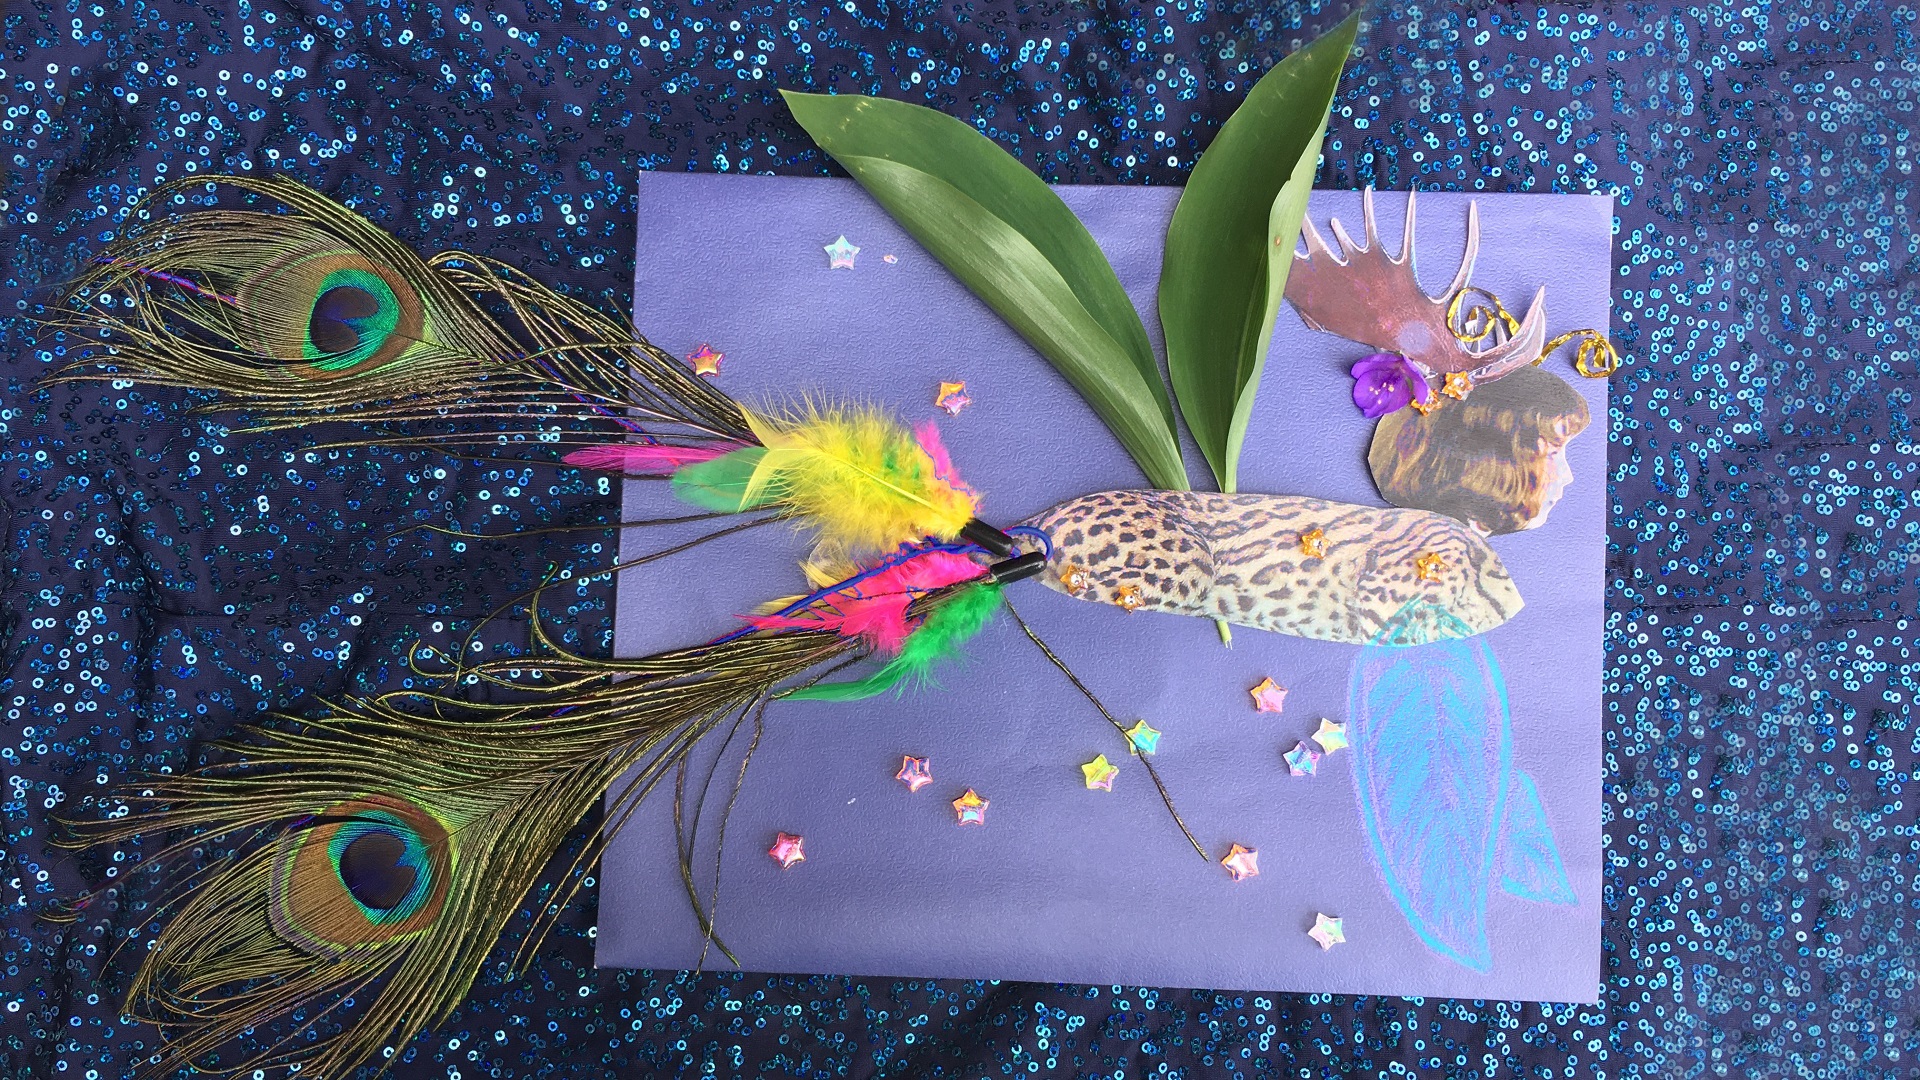 A collage, on a blue background, of a chimera with a human child’s face, moose antlers, gold antennae, blue and purple fish fins, wings made of leave, spotted ocelot body, and a tail made of colourful feathers. A flower under the antlers and star-shaped beads decorate the whole artwork.